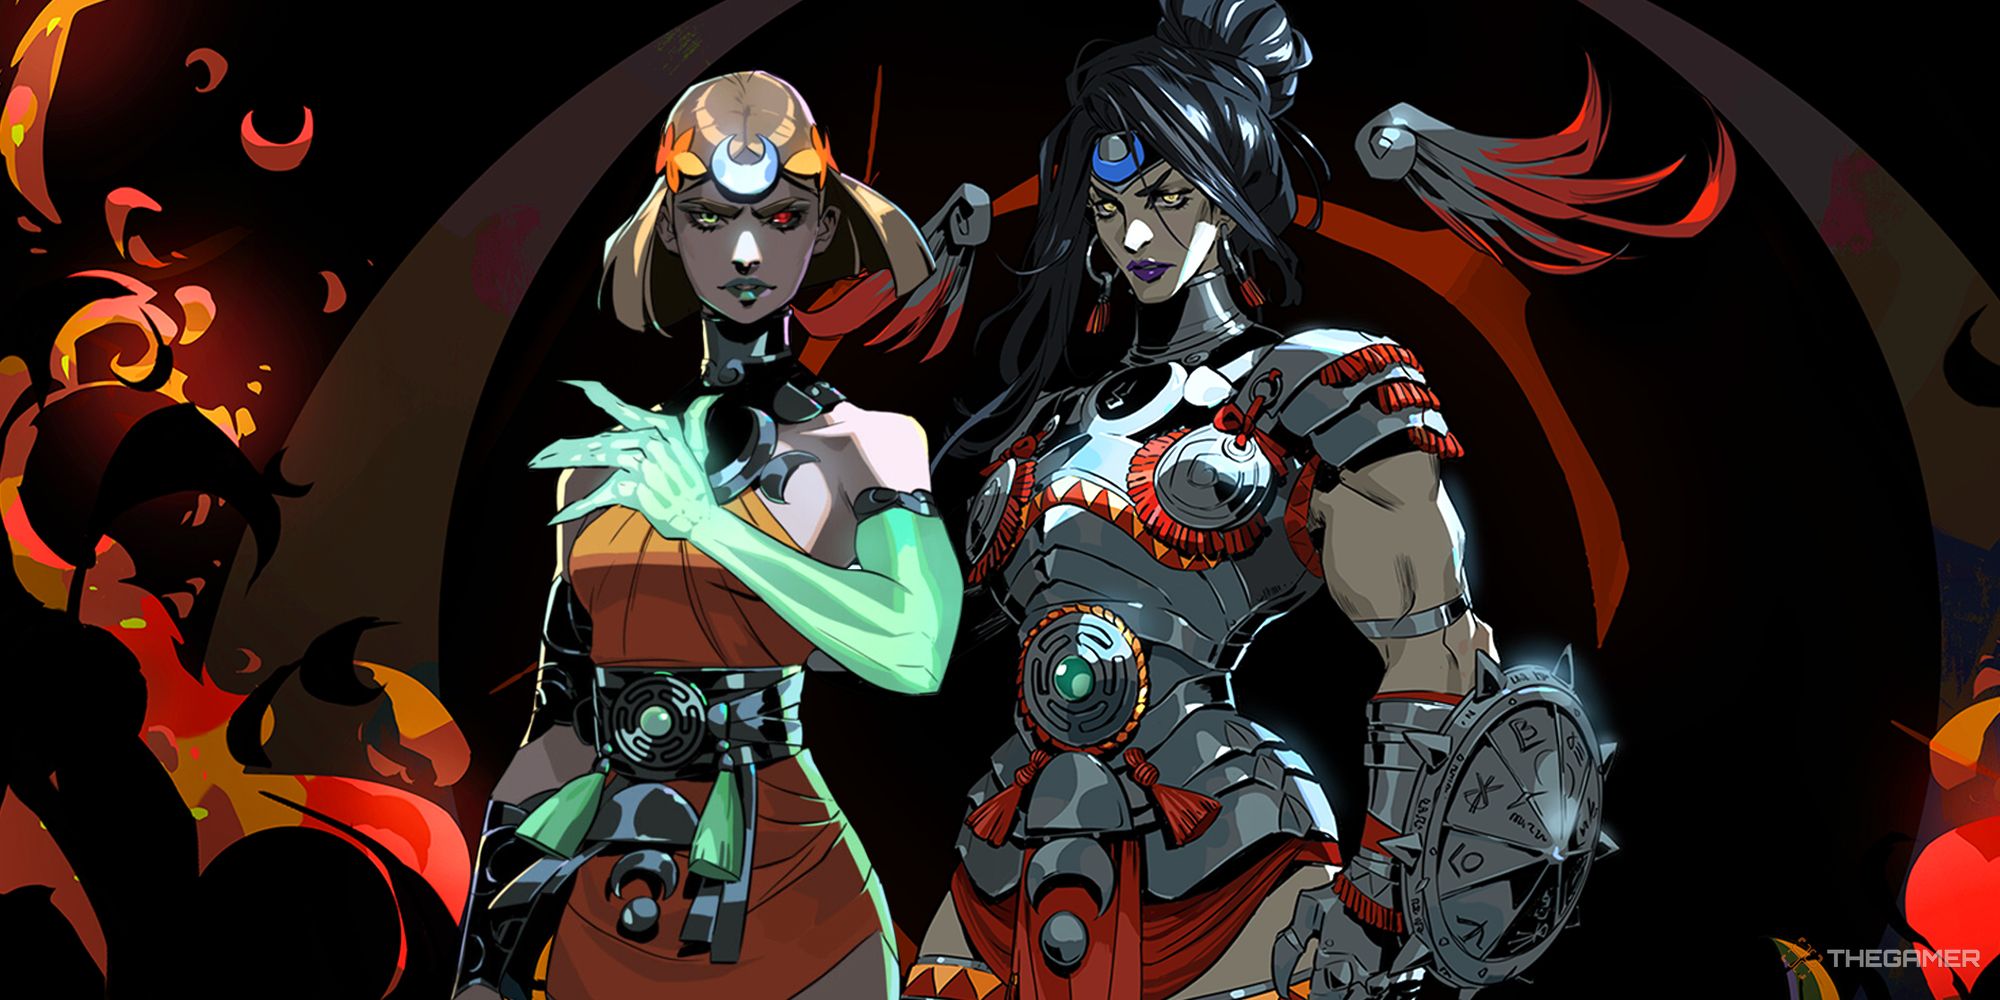 Hades 2's protagonist and Nemesis standing side by side